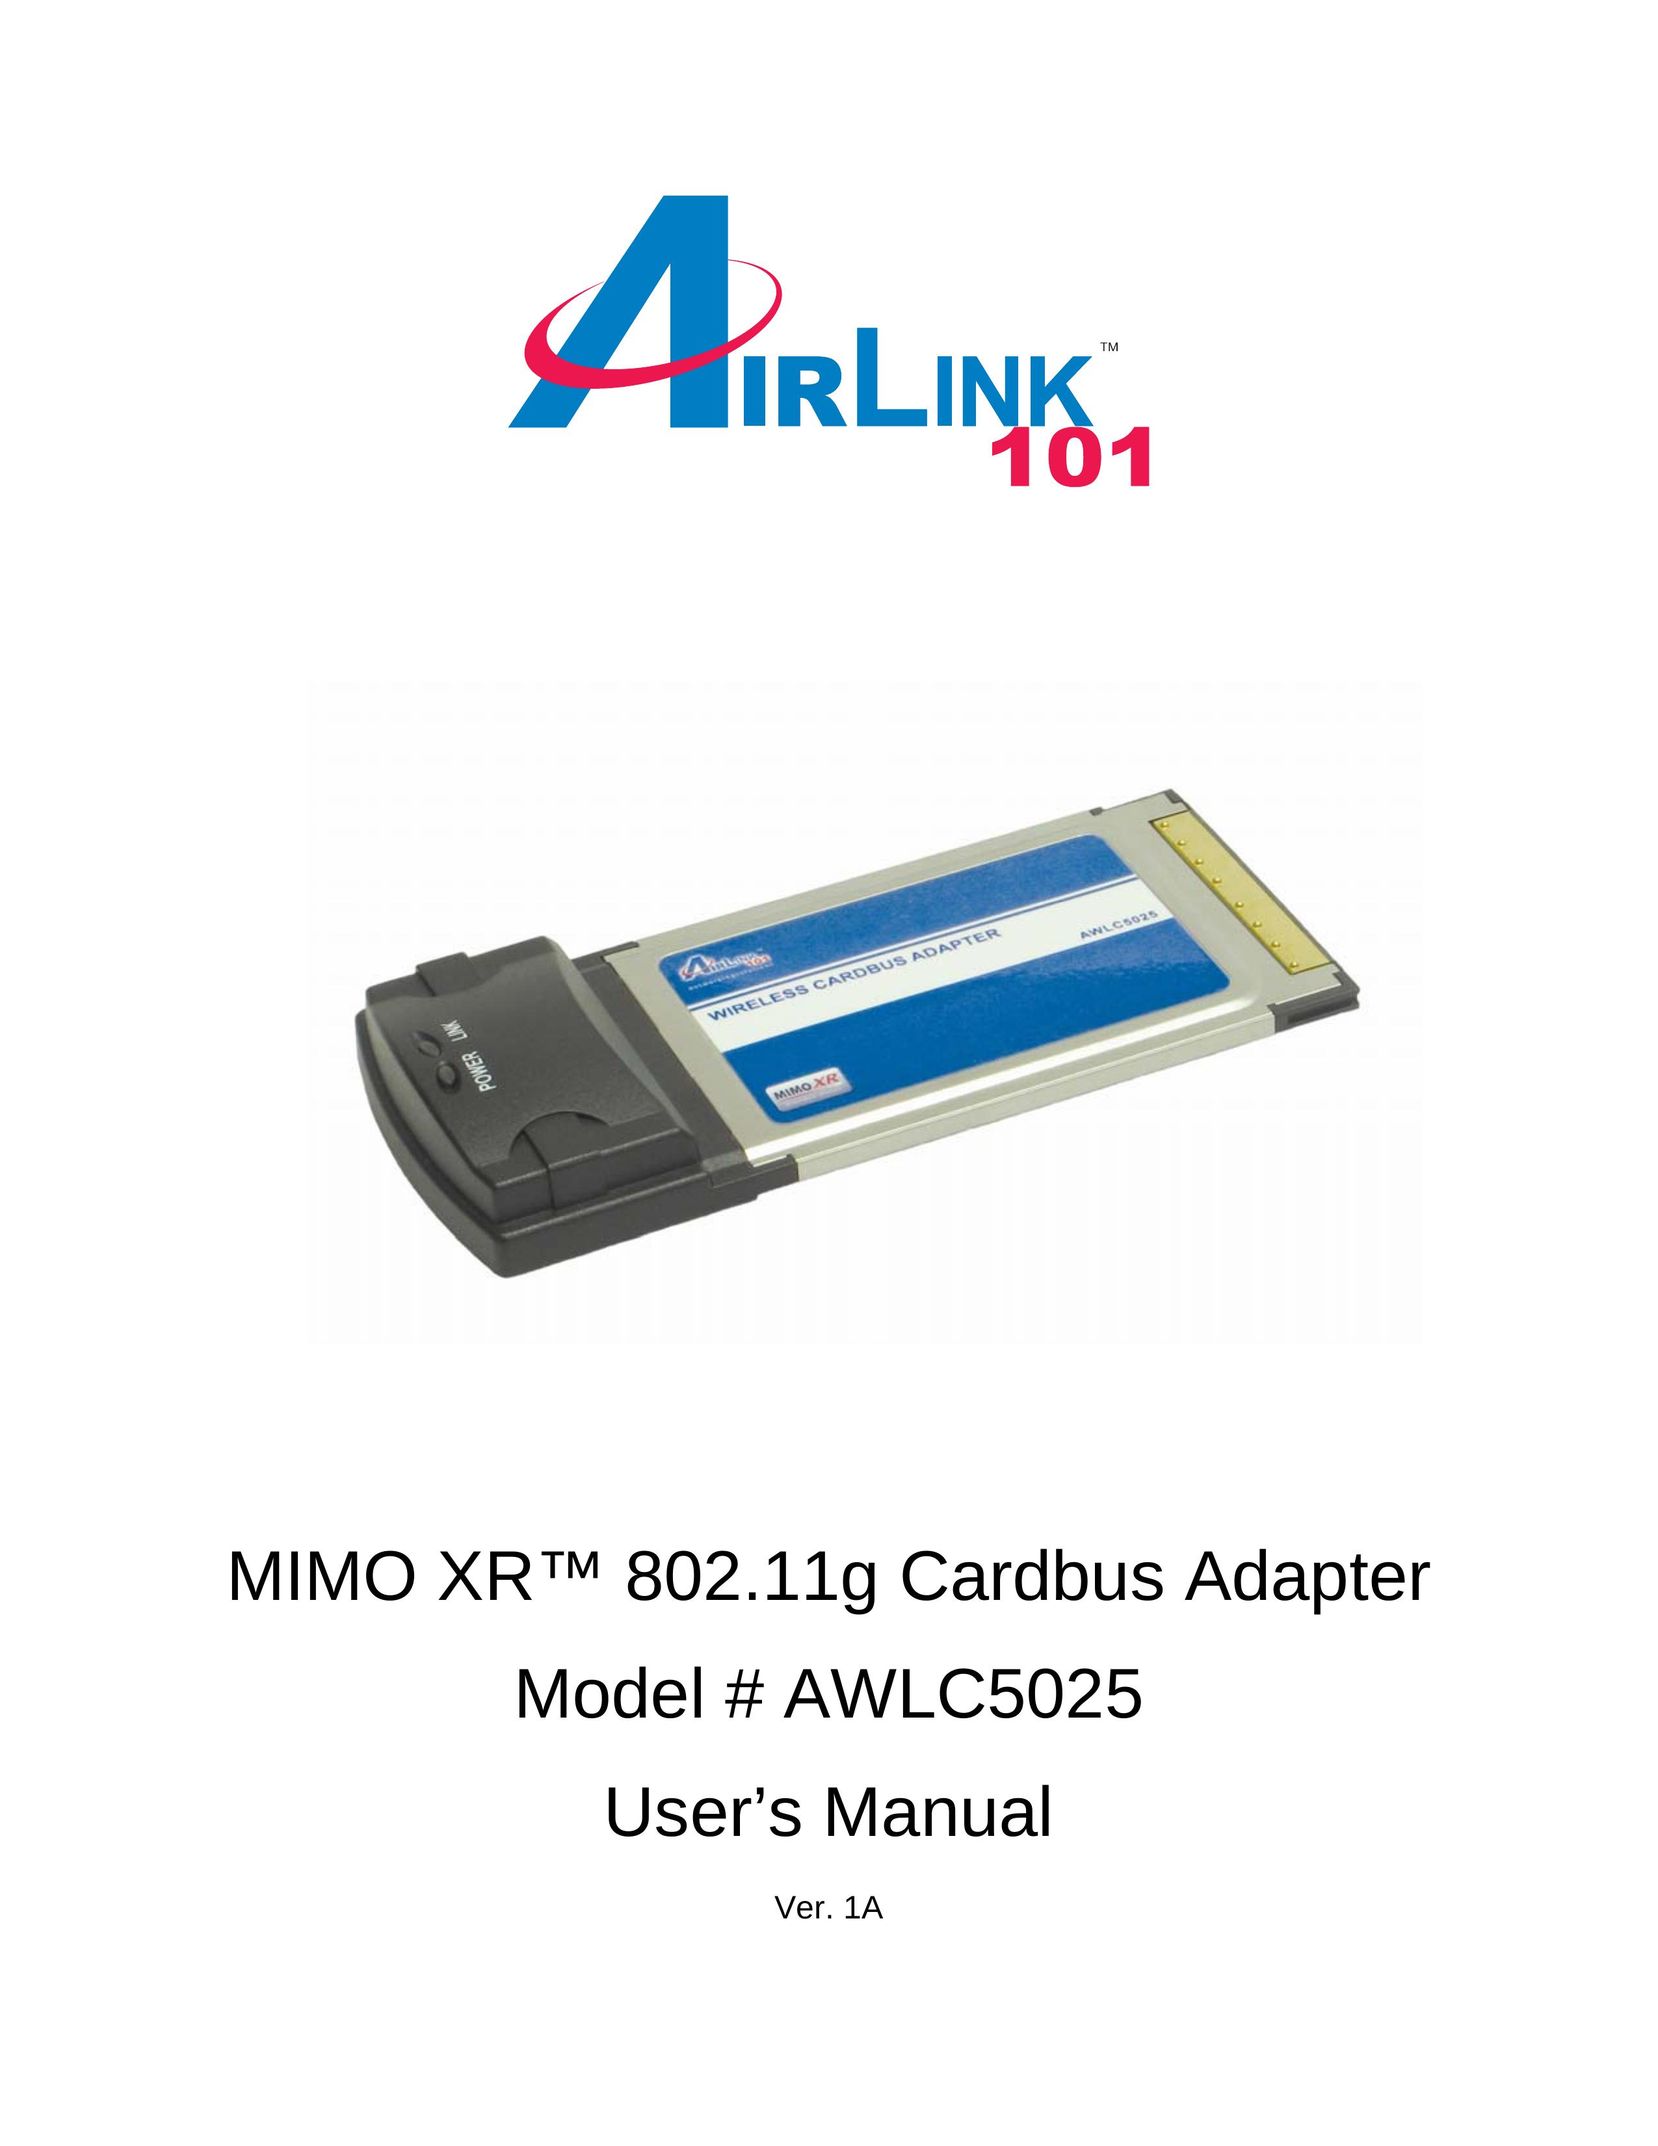 Airlink101 AWLC5025 Network Card User Manual